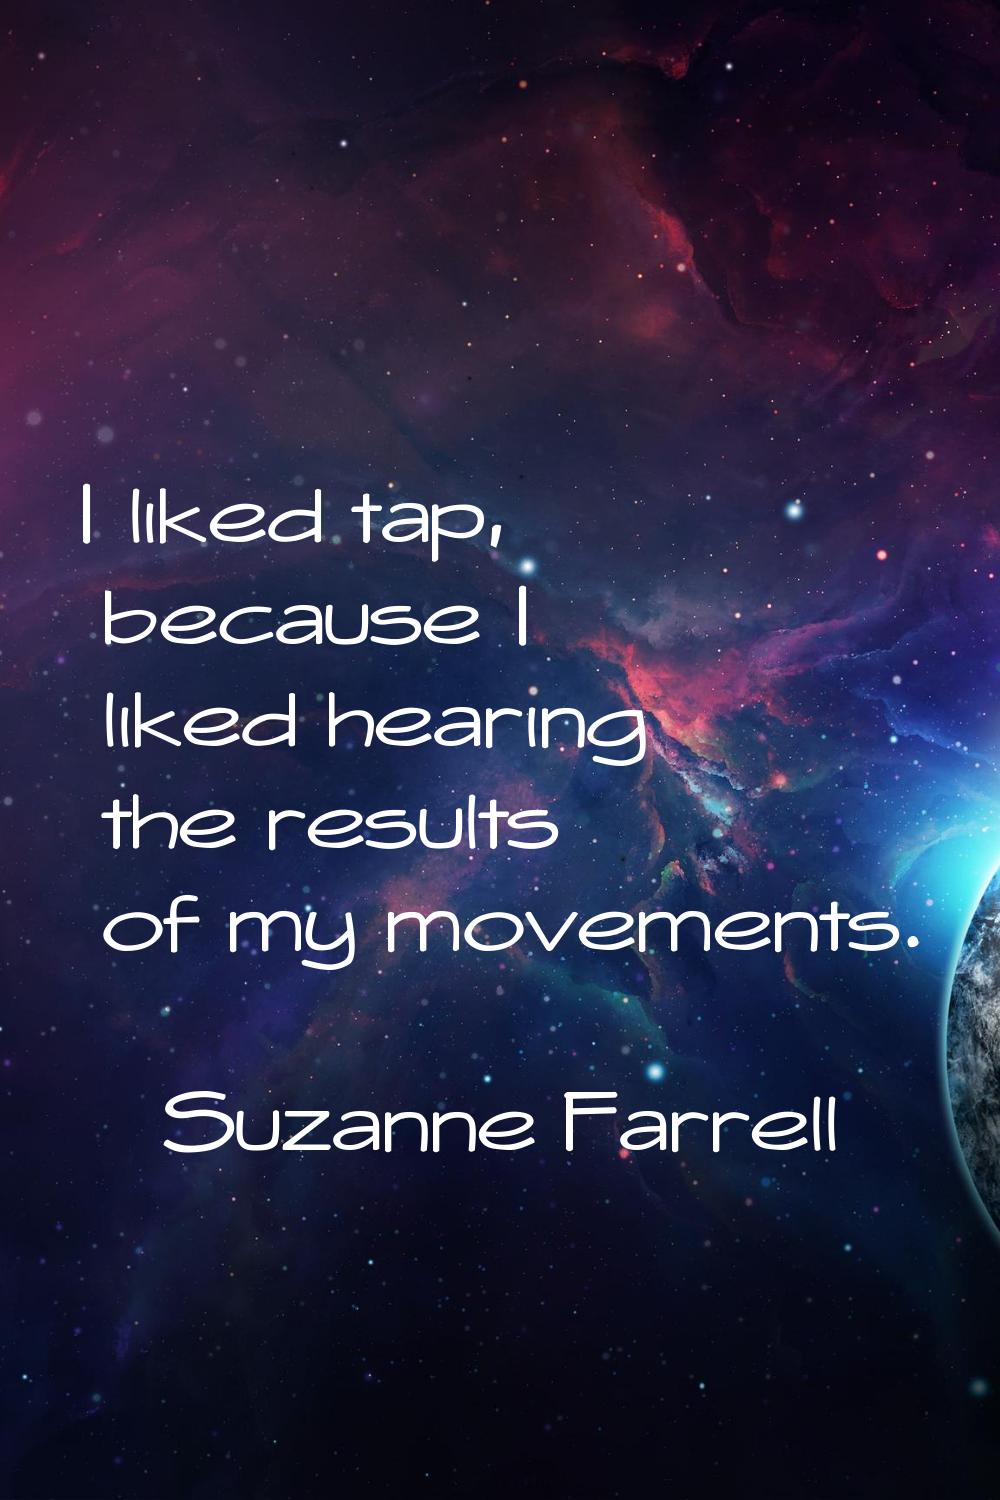 I liked tap, because I liked hearing the results of my movements.